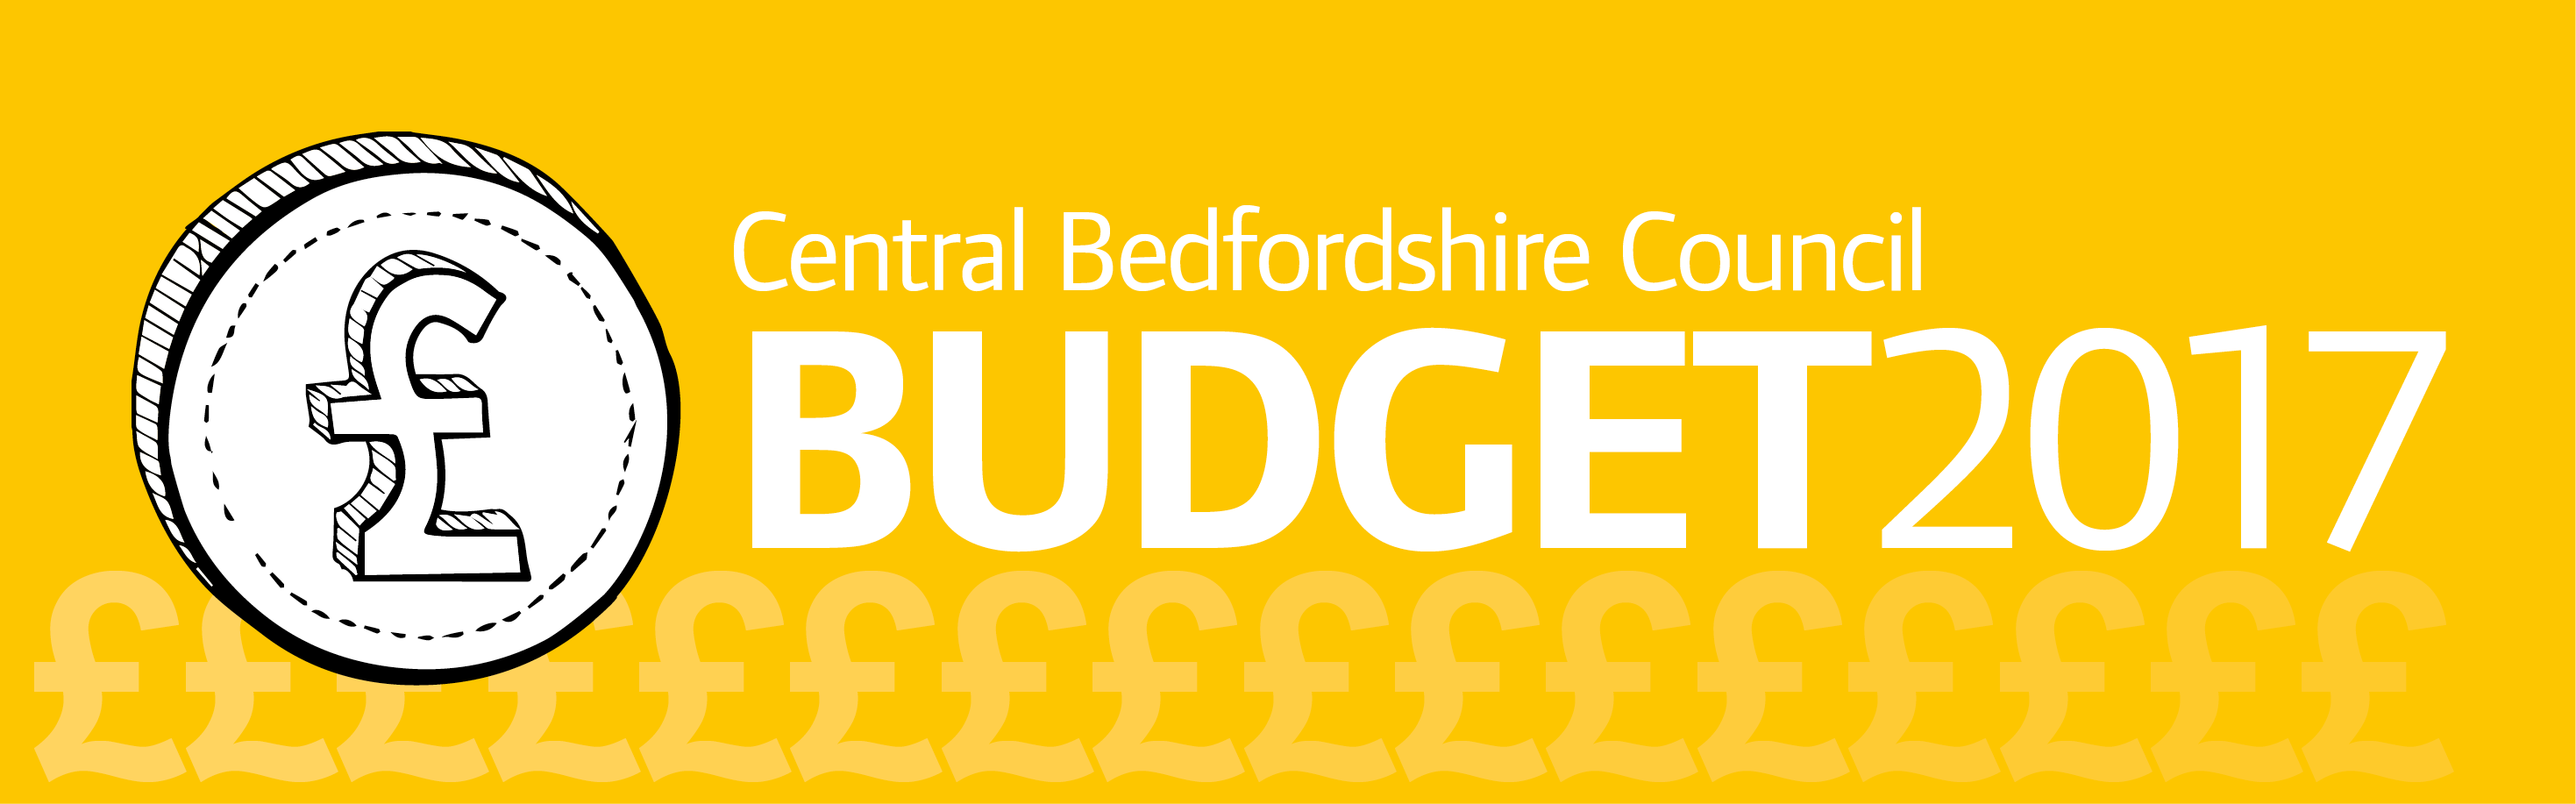 Budget 2017 - Have your say on how Central Bedfordshire Council spends your money